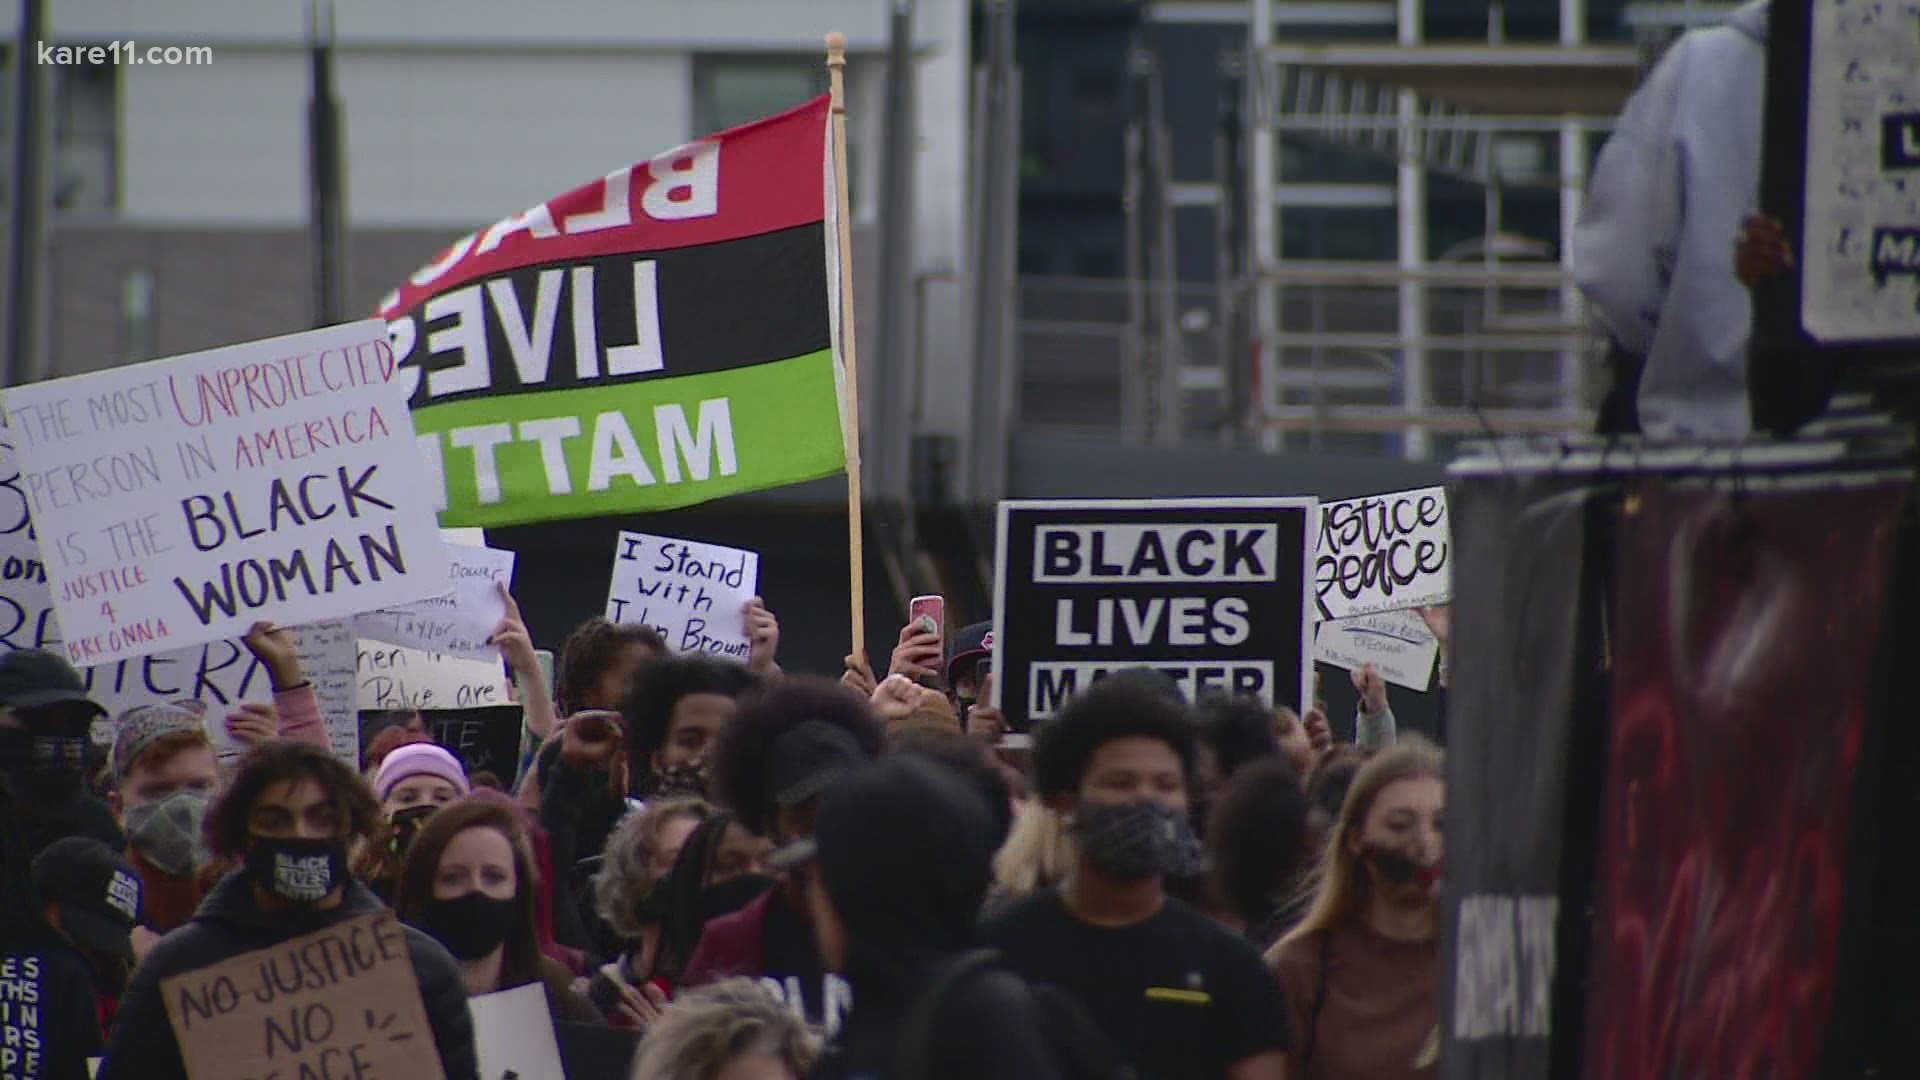 Protestors marched for Breonna Taylor on Sunday, starting at U.S. Bank Stadium.